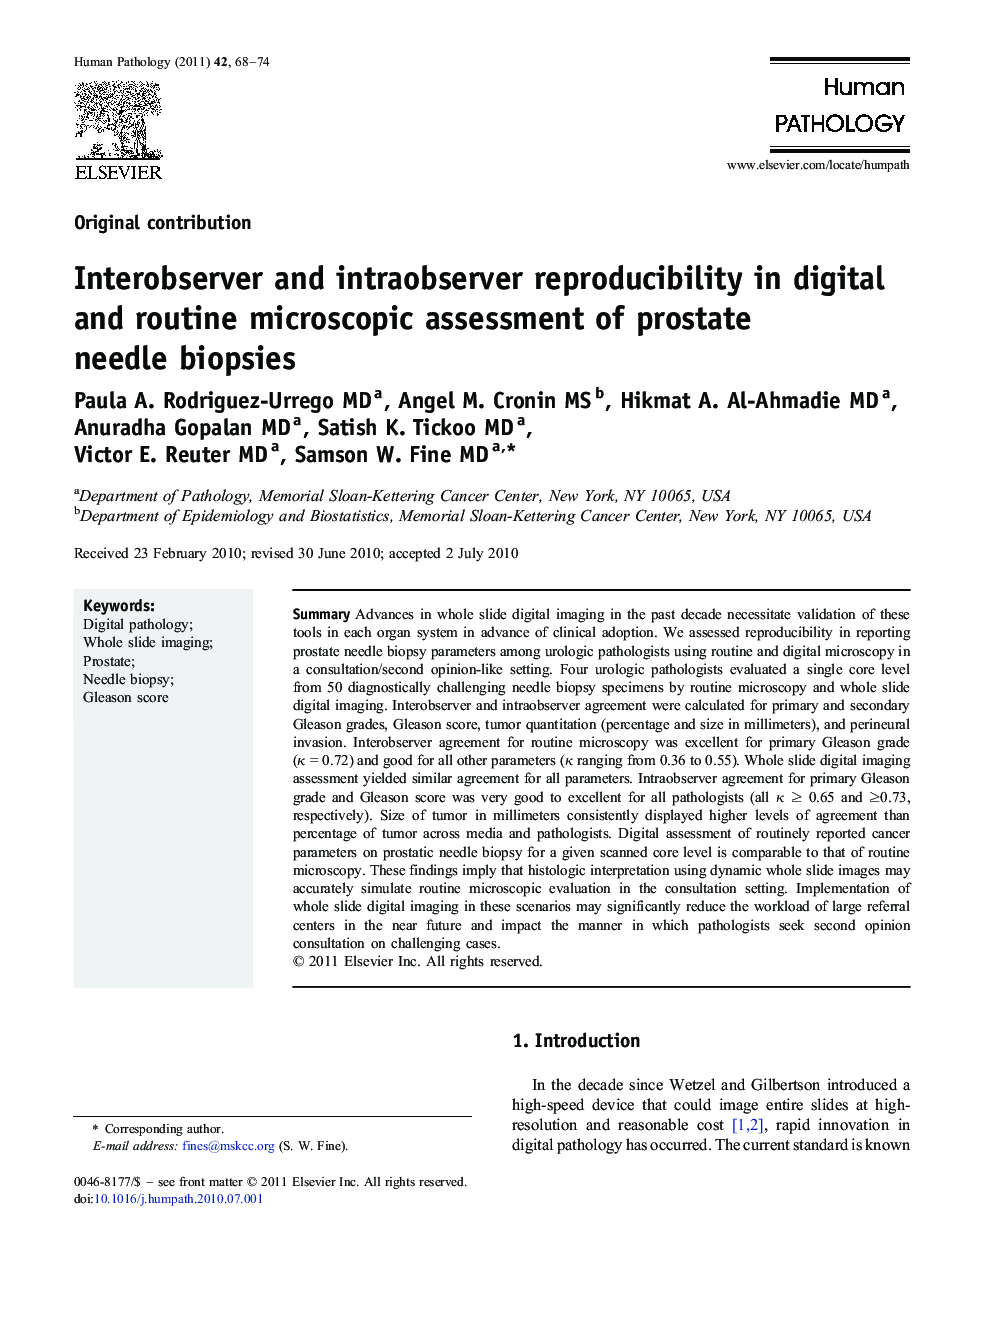 Interobserver and intraobserver reproducibility in digital and routine microscopic assessment of prostate needle biopsies